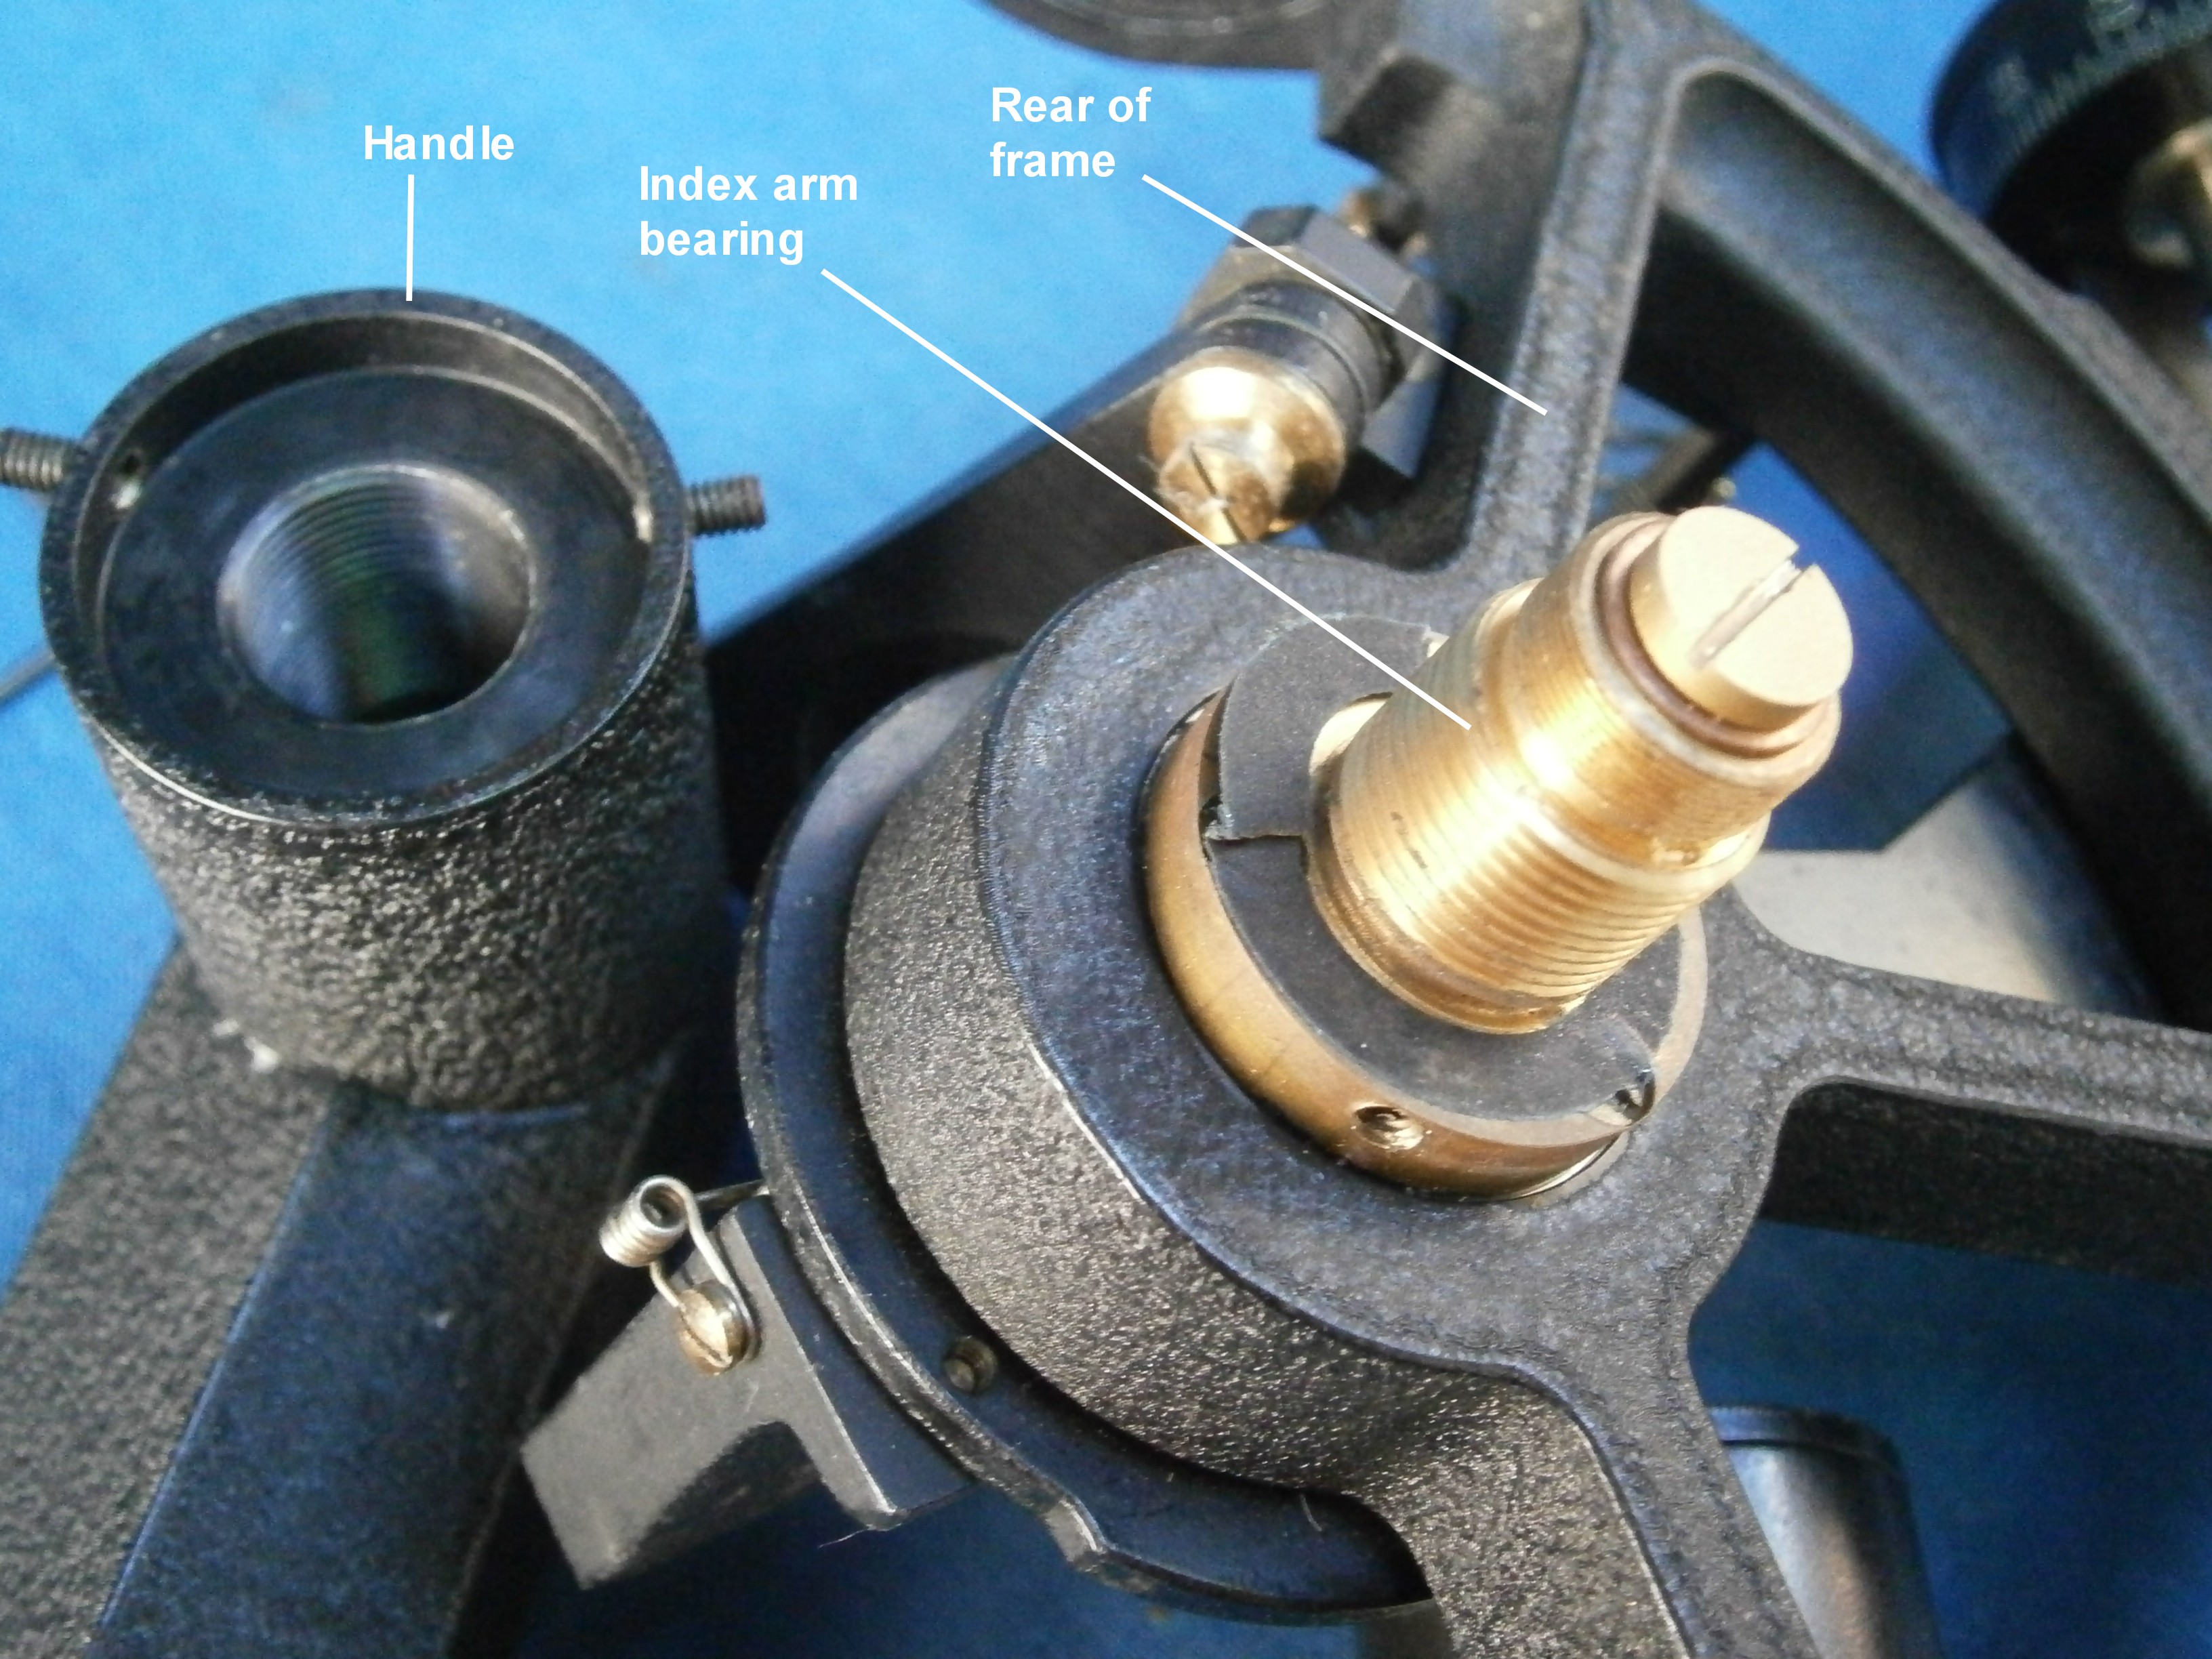 Figure 5: Index arm bearing, and handle attachment.